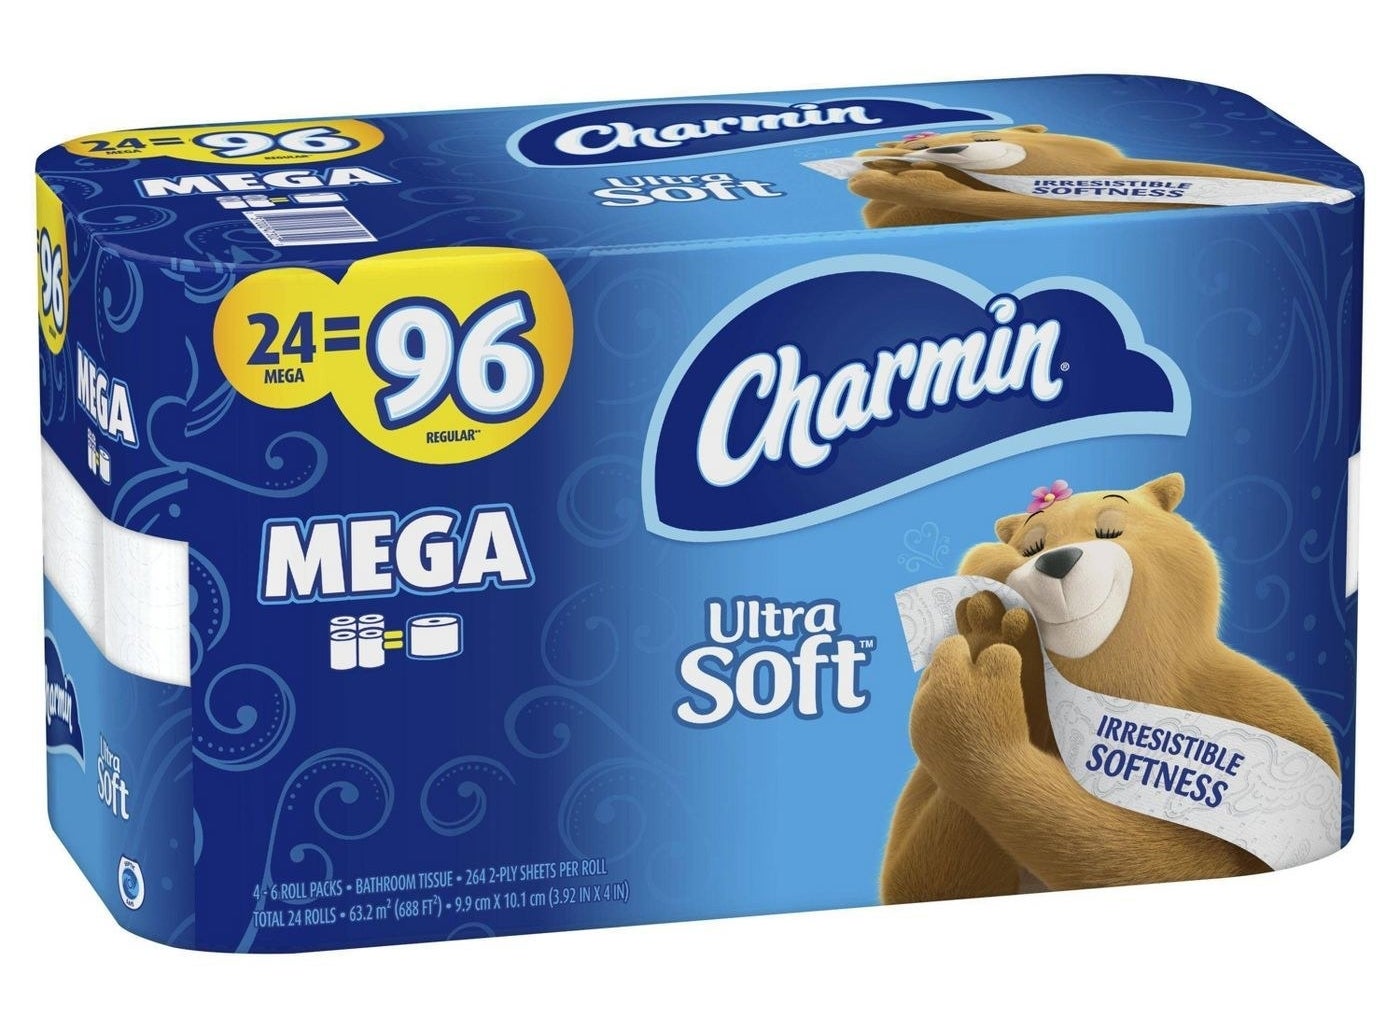 the pack of Charmin